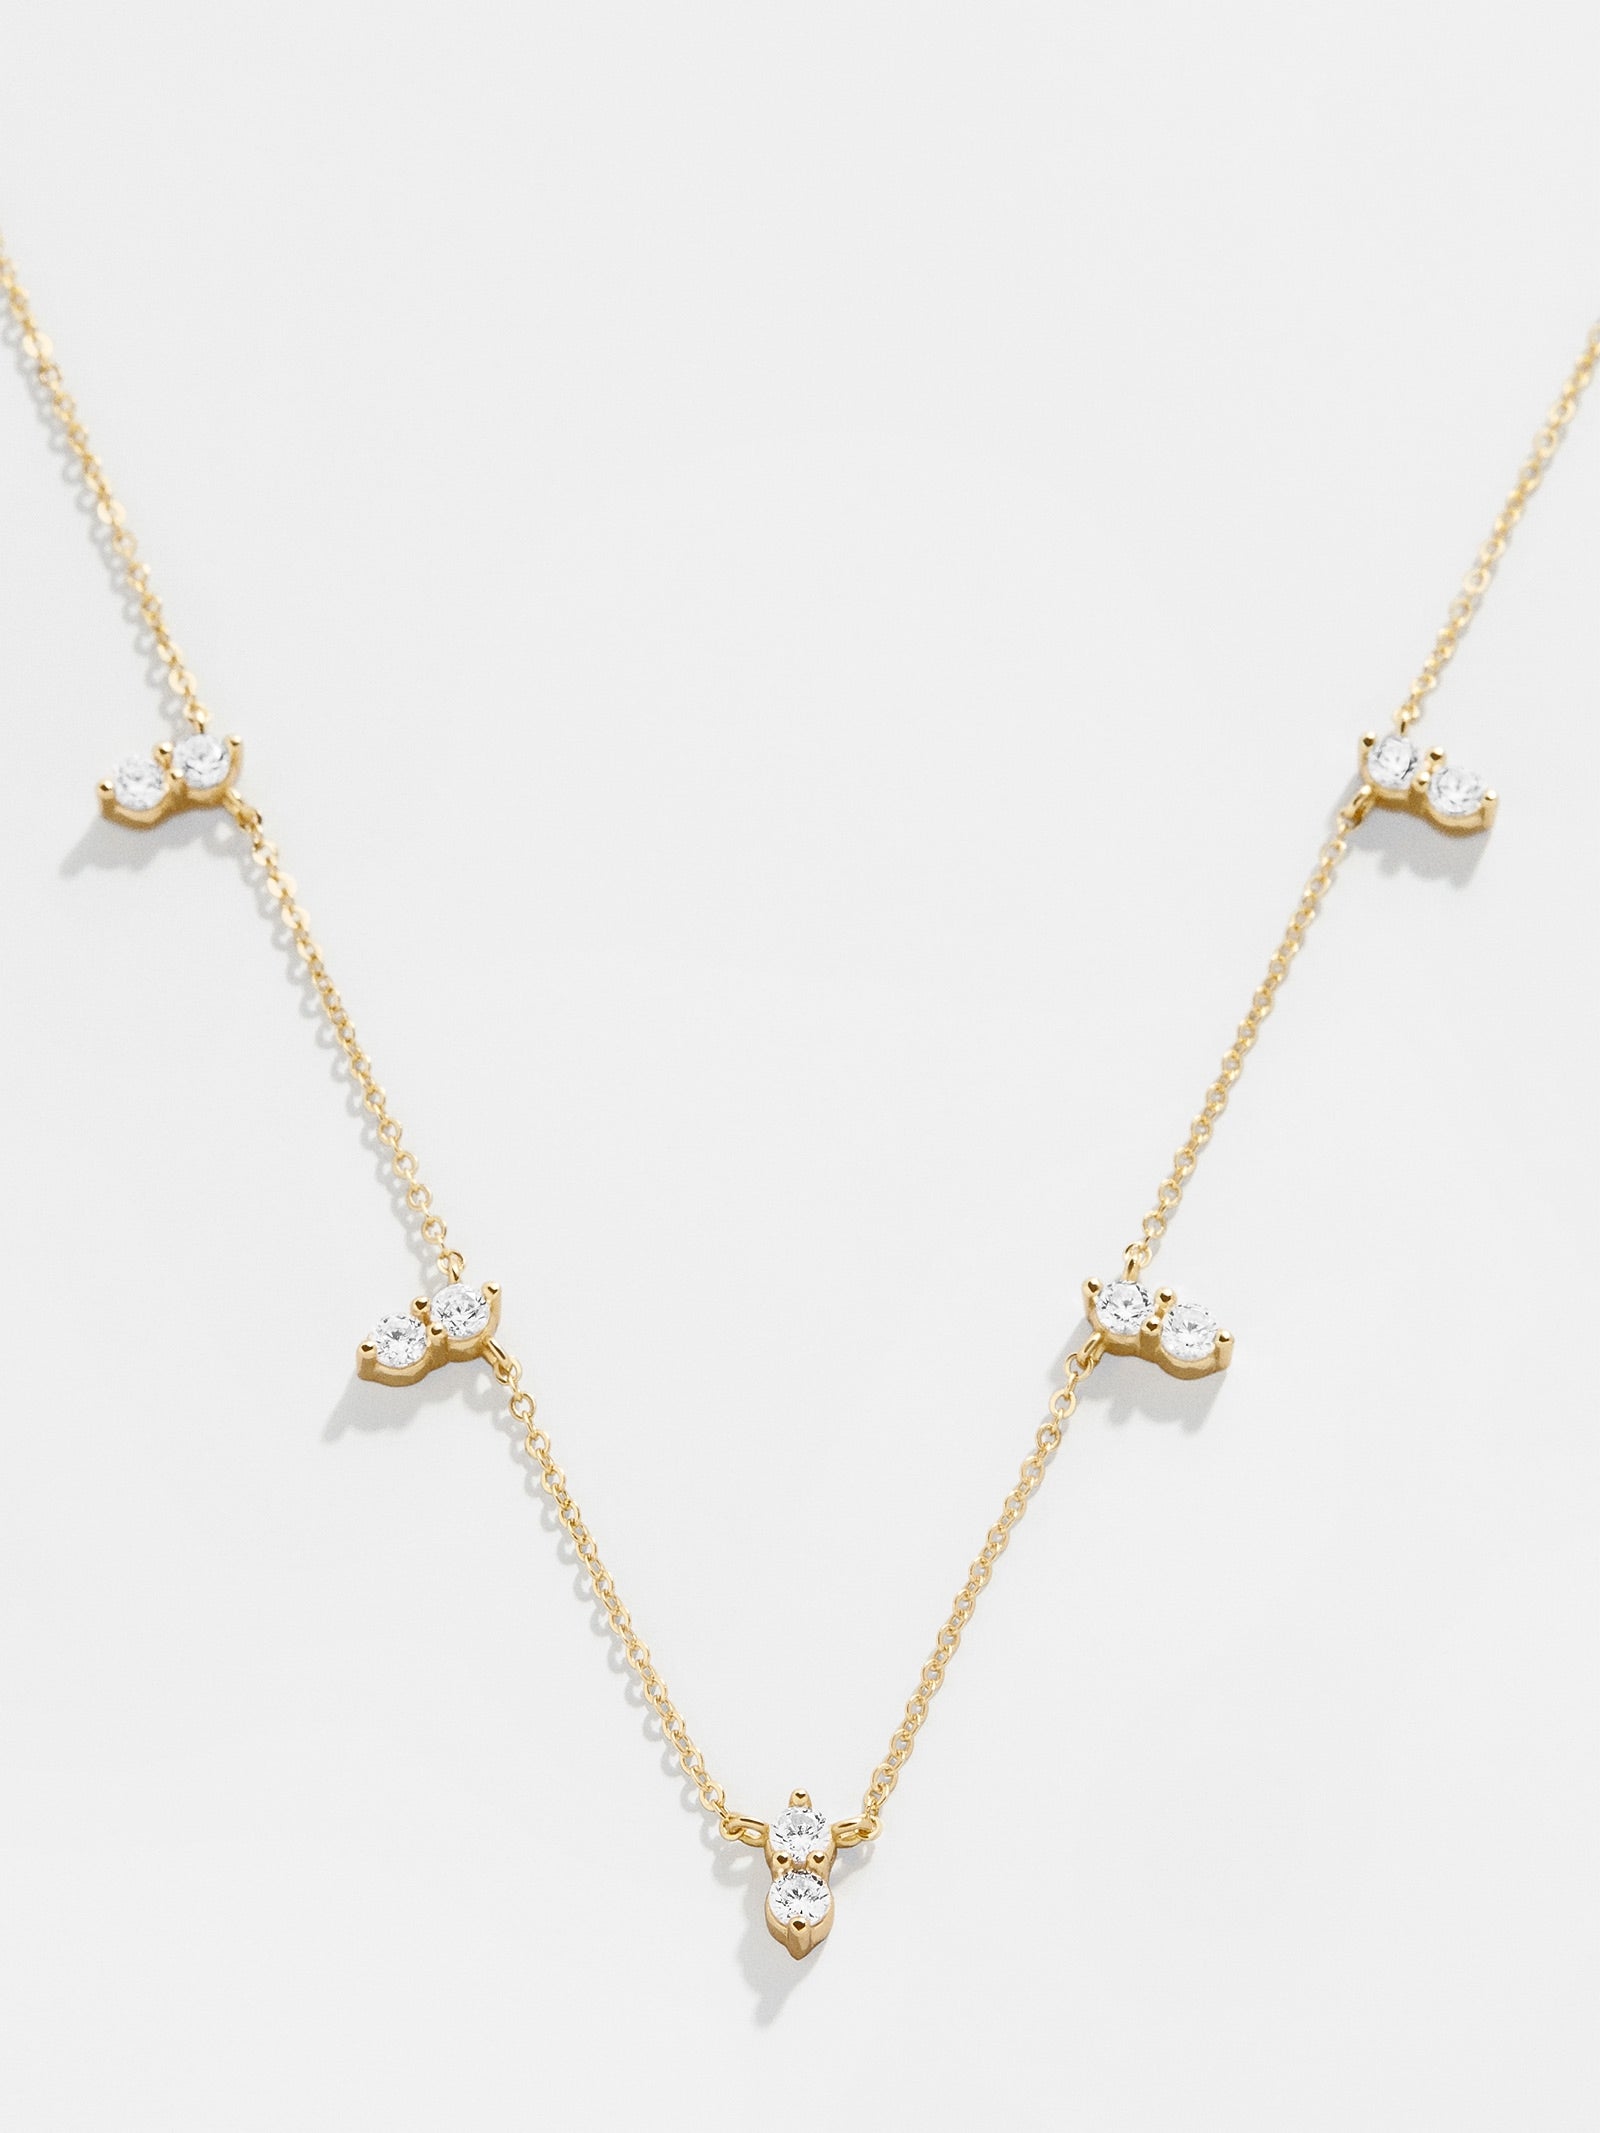 Outstanding 18K Gold Necklace